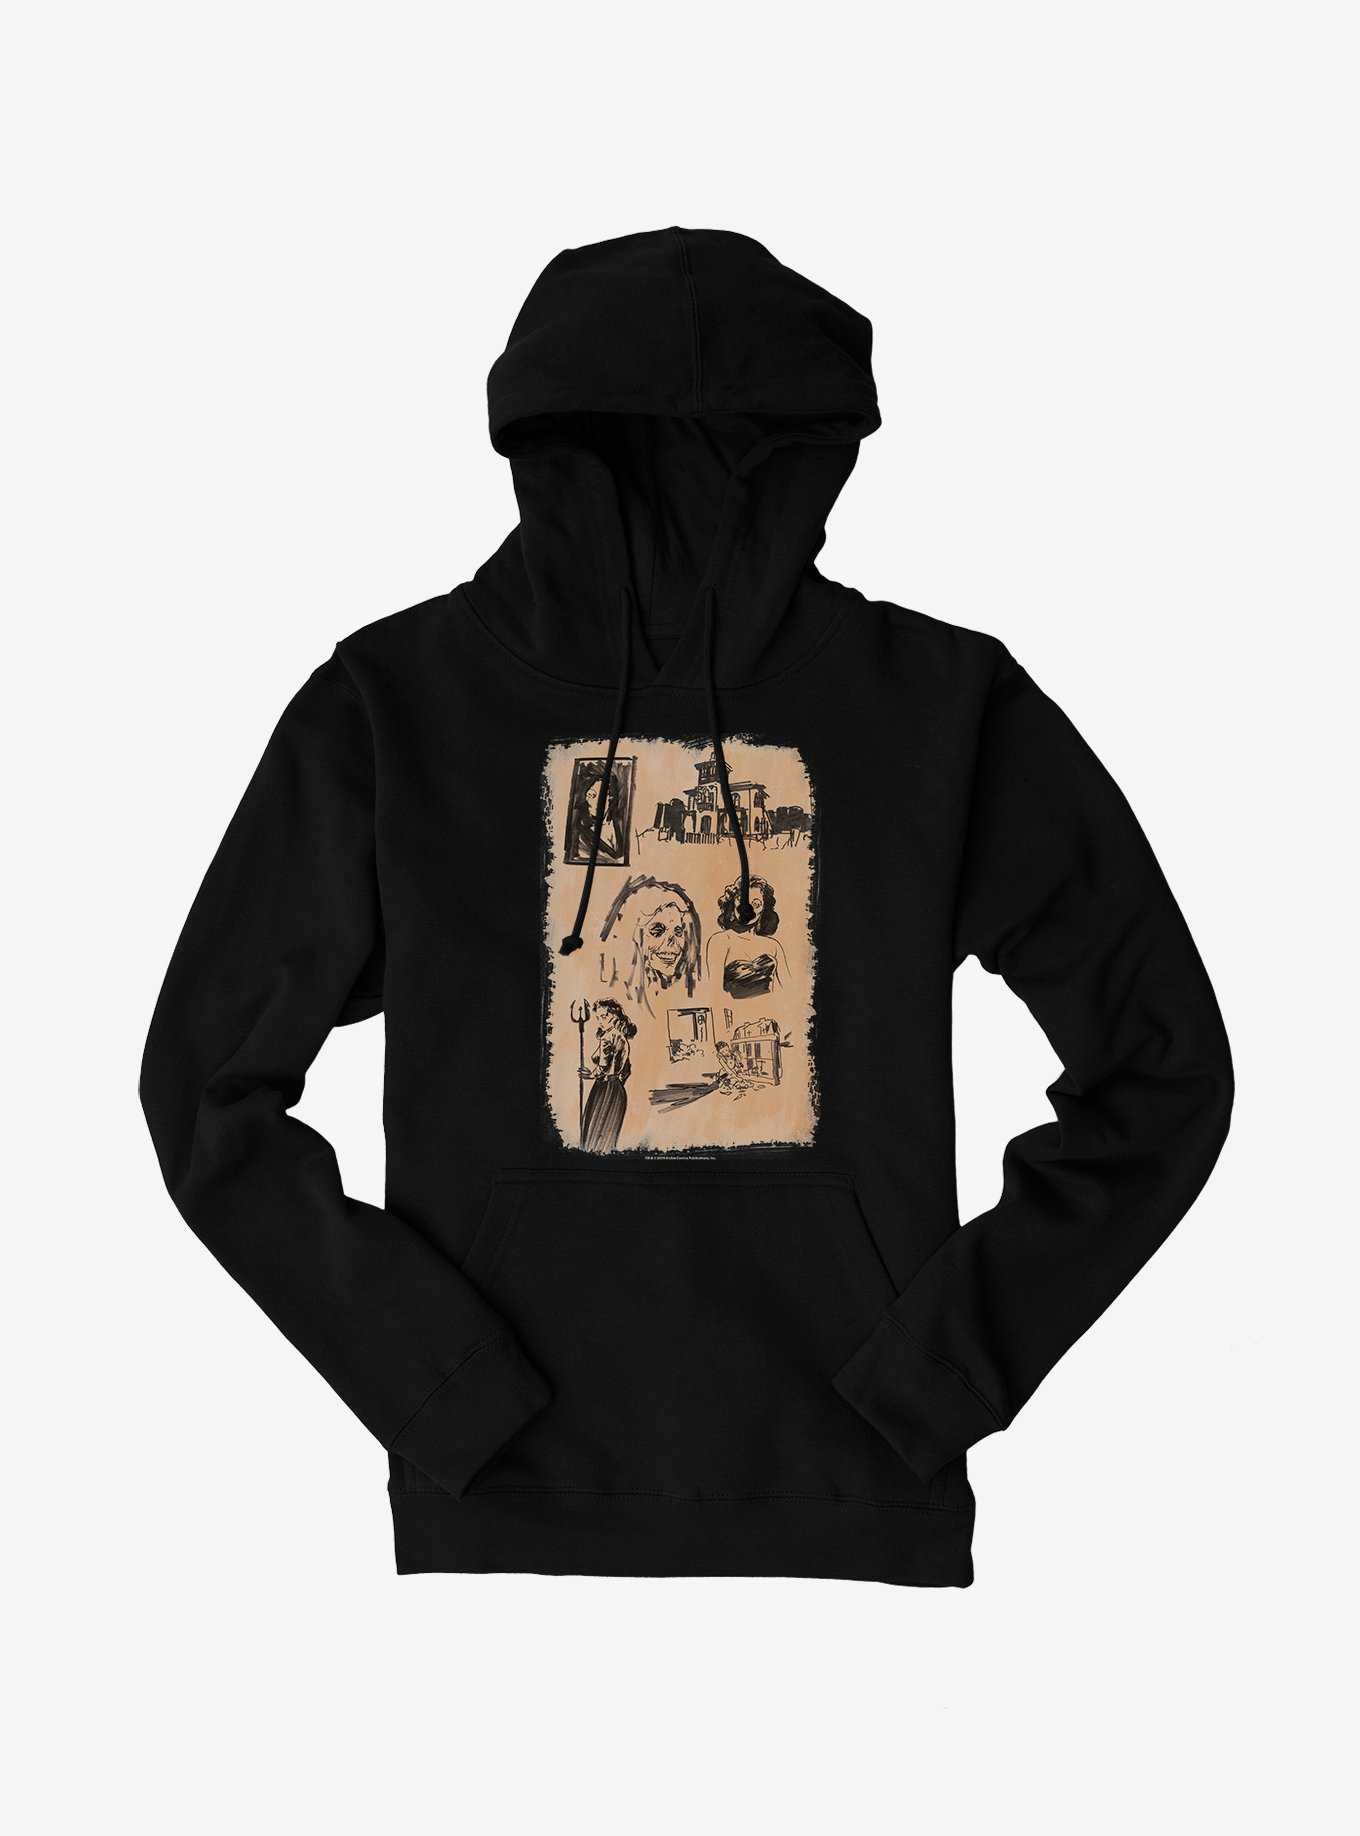 Archie Comics Chilling Adventures of Sabrina Horror Sketches Hoodie, , hi-res